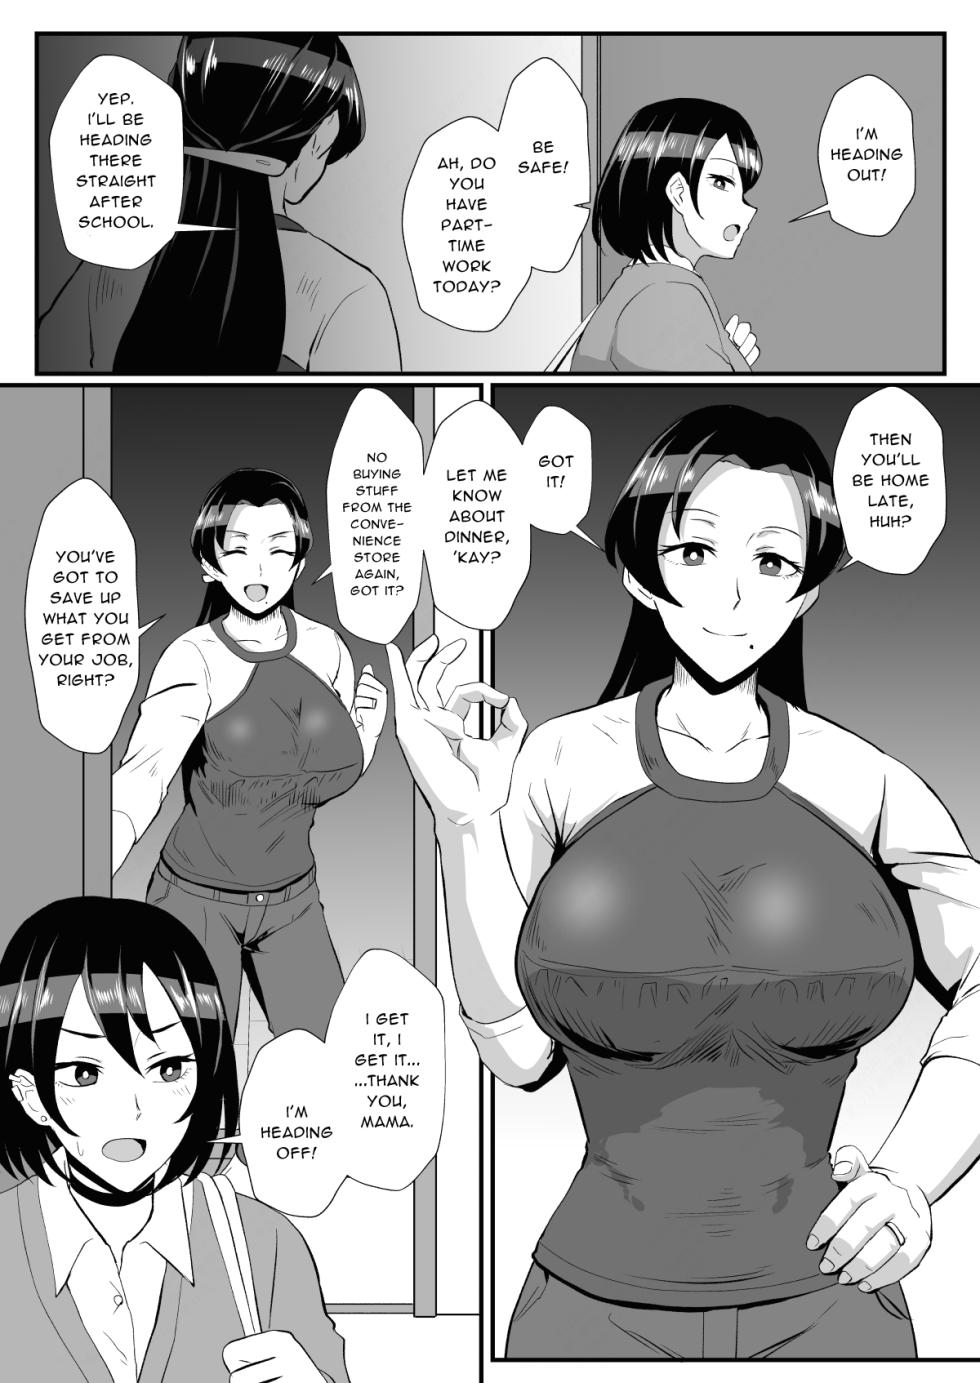 [Hotel Shikinseki (Protohotel)]"I want to protect my daughter entrusted to me by my absentee husband" Part time work as a stay-at-home housekeeper with my mom! (Mother and daughter under hypnosis) [Digital] [Daddy Scan Me Harder!] - Page 2